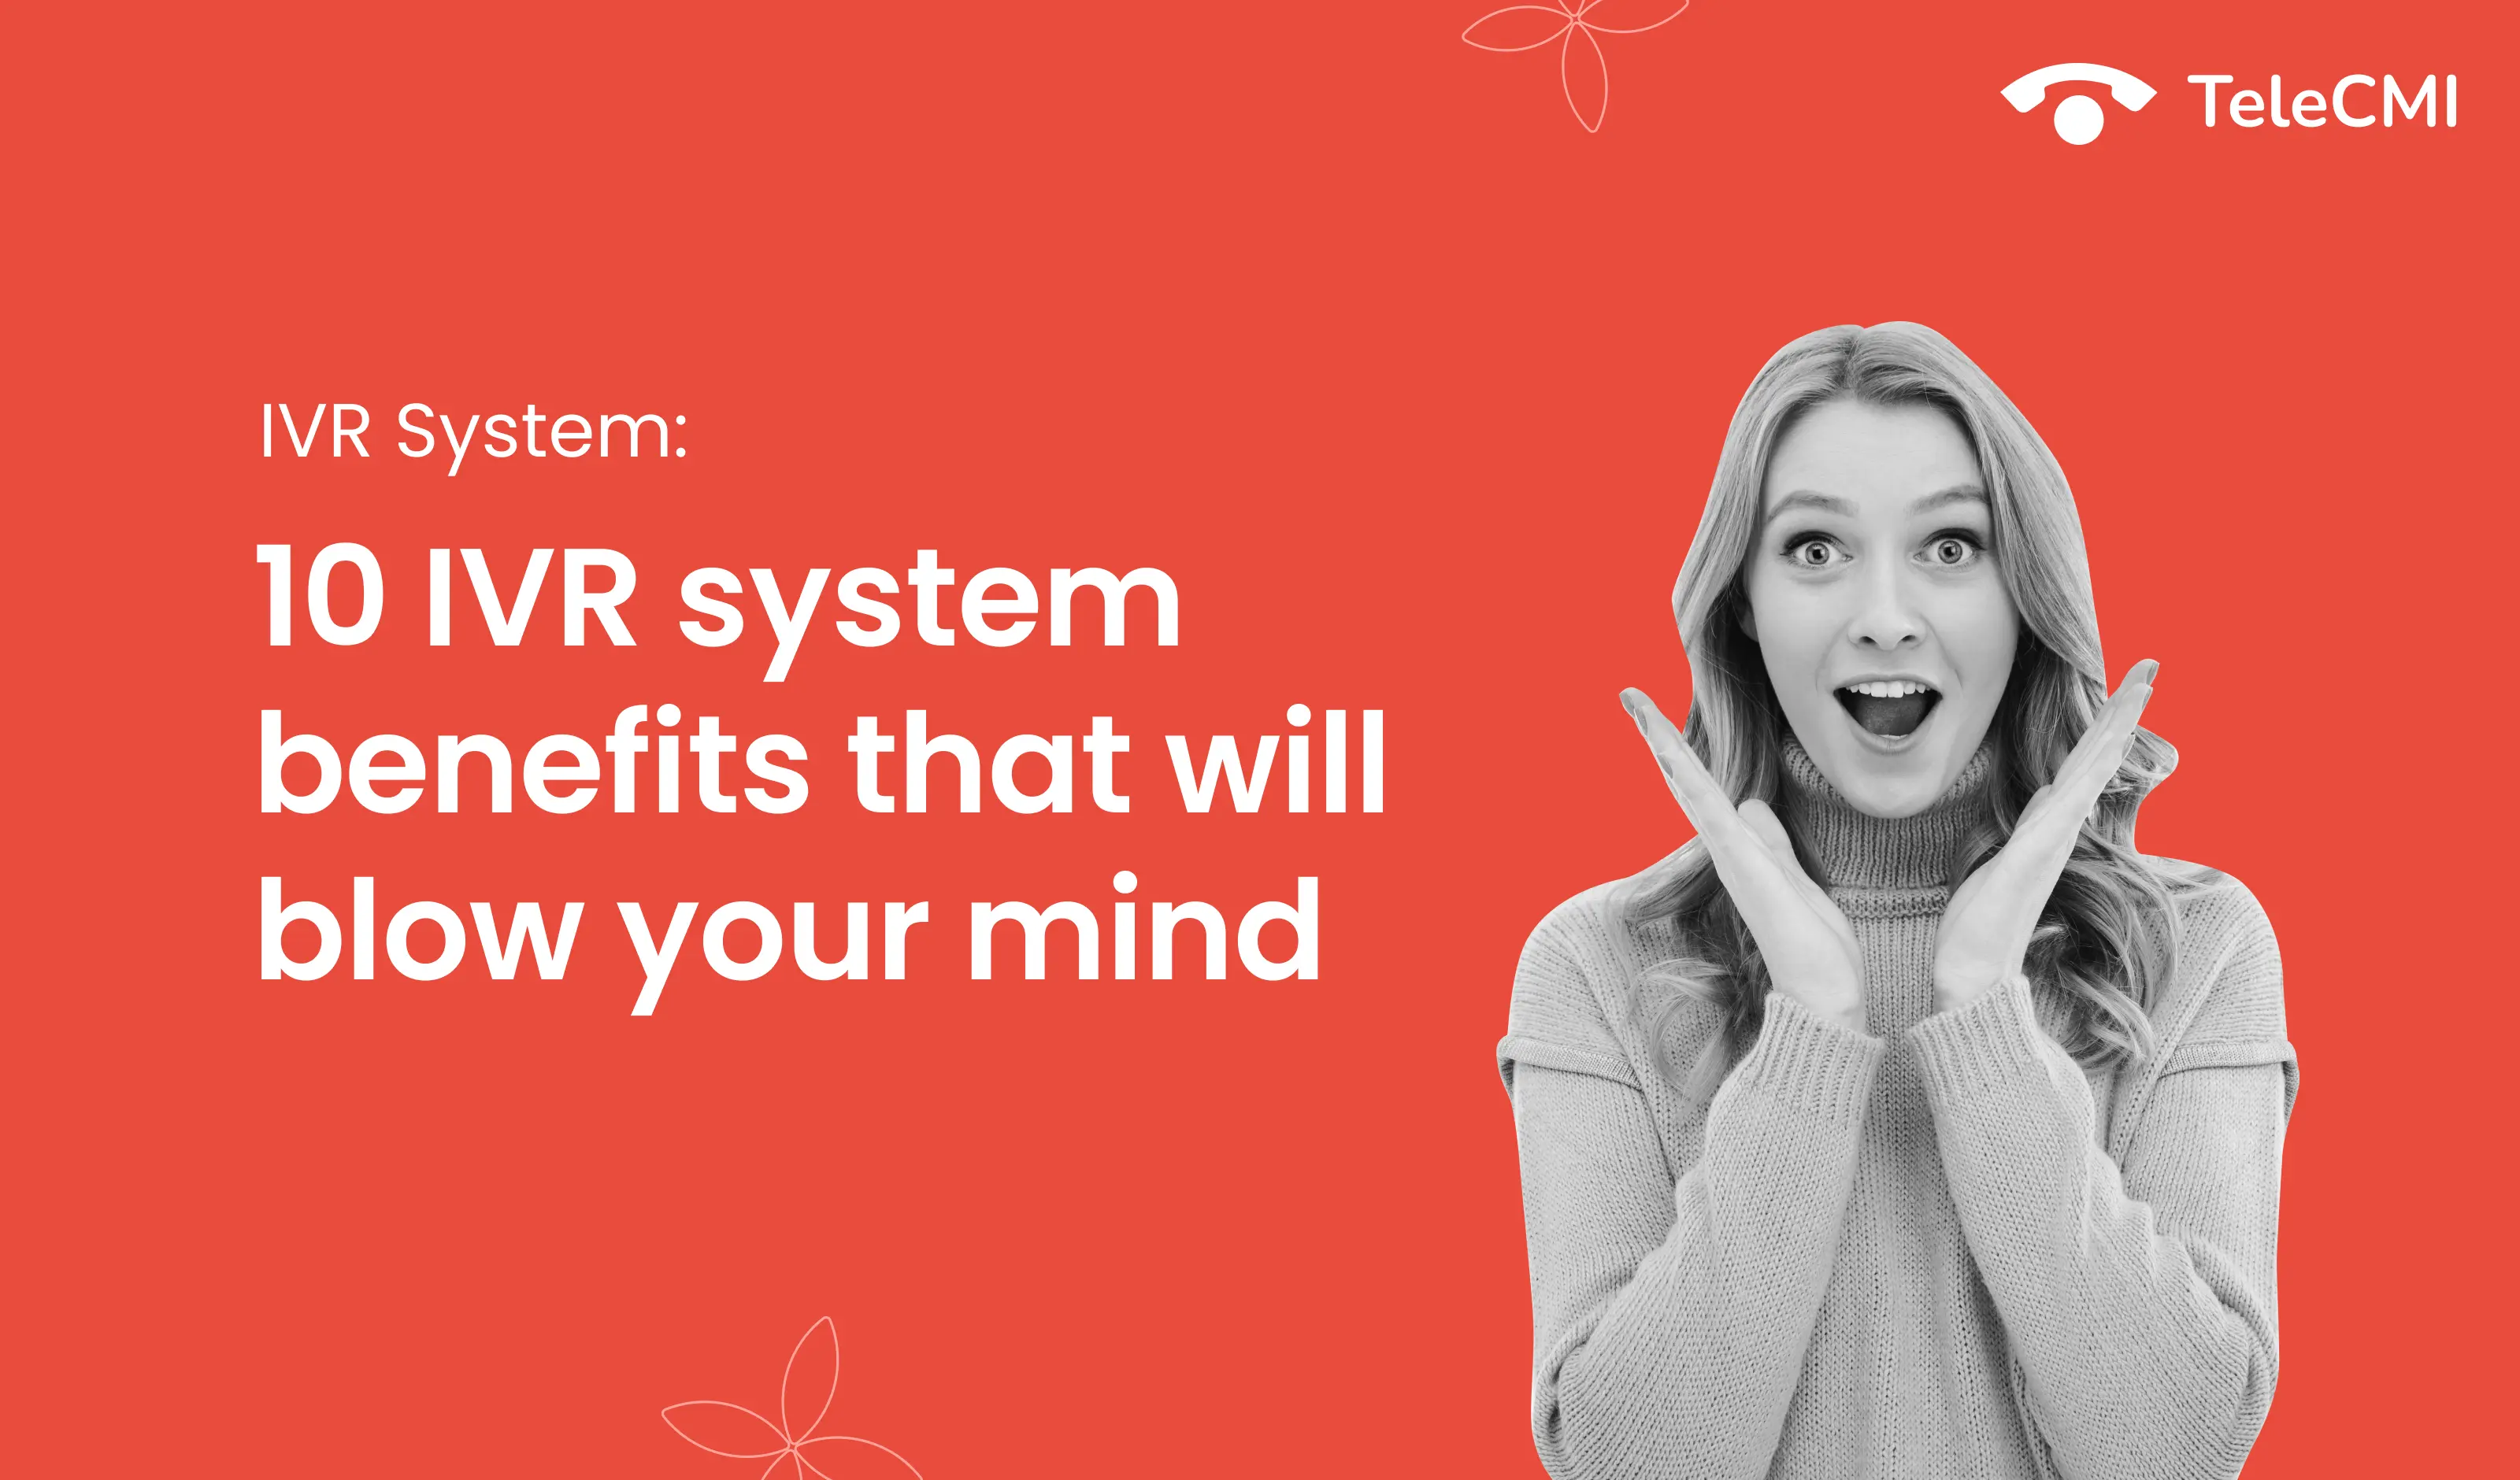 10 Benefits of the IVR System That Will Blow Your Mind